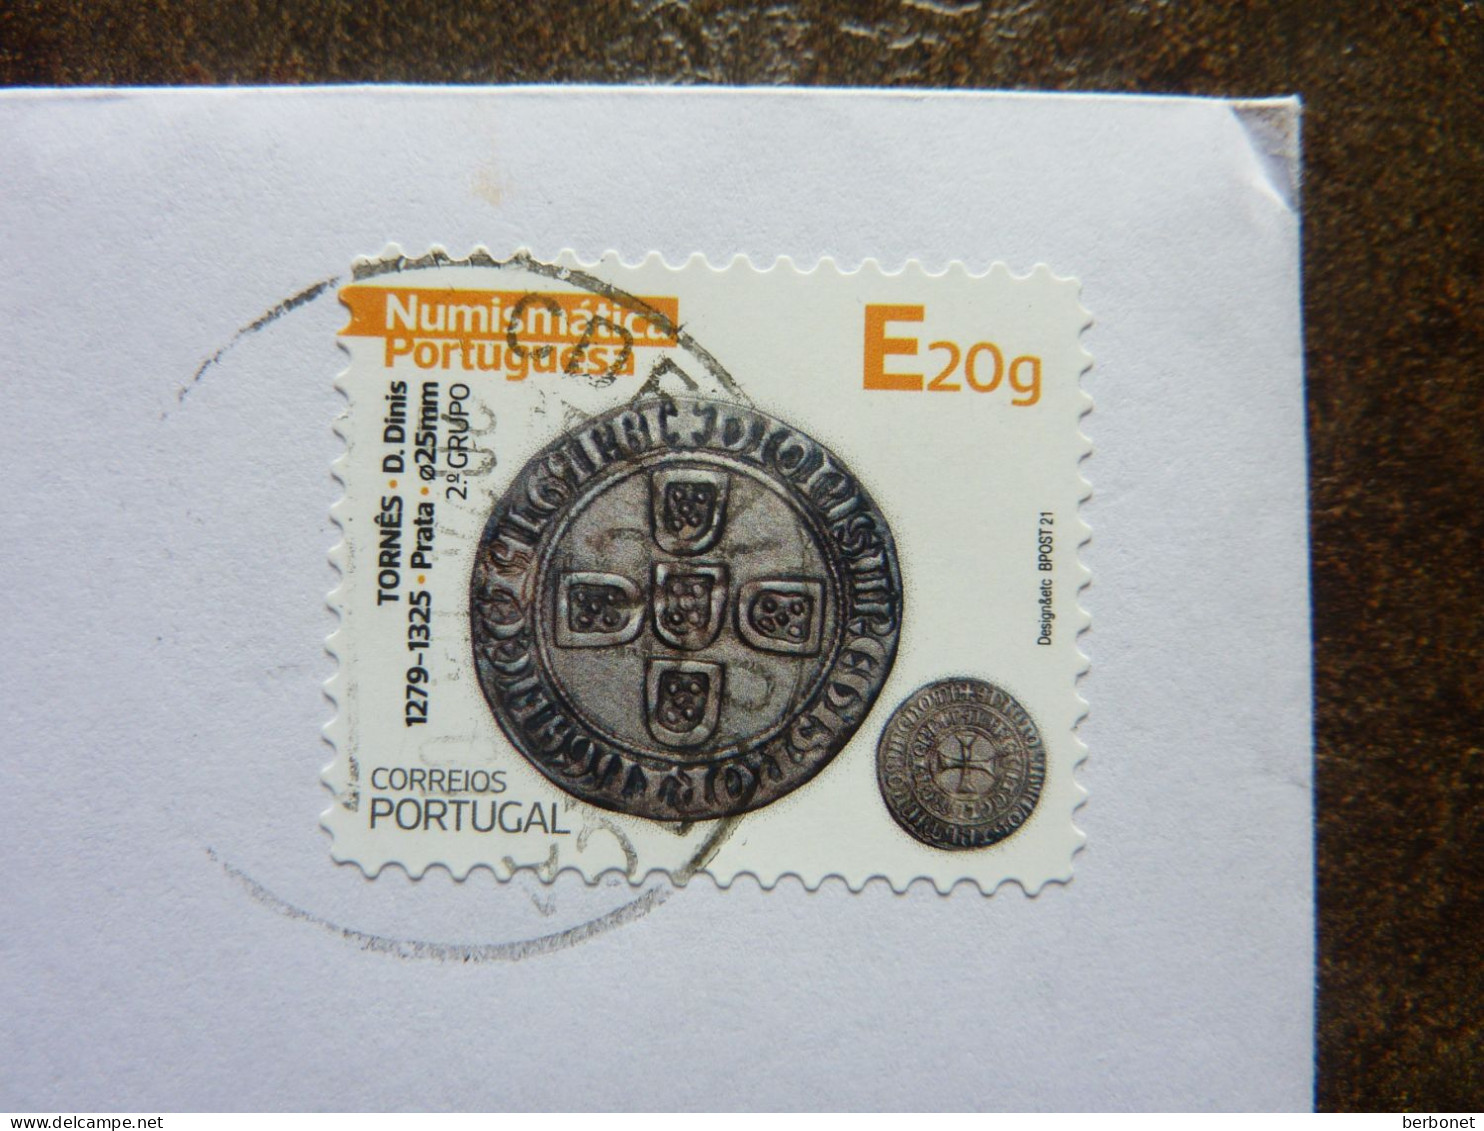 2024  Stamp Used On A Letter - Usati